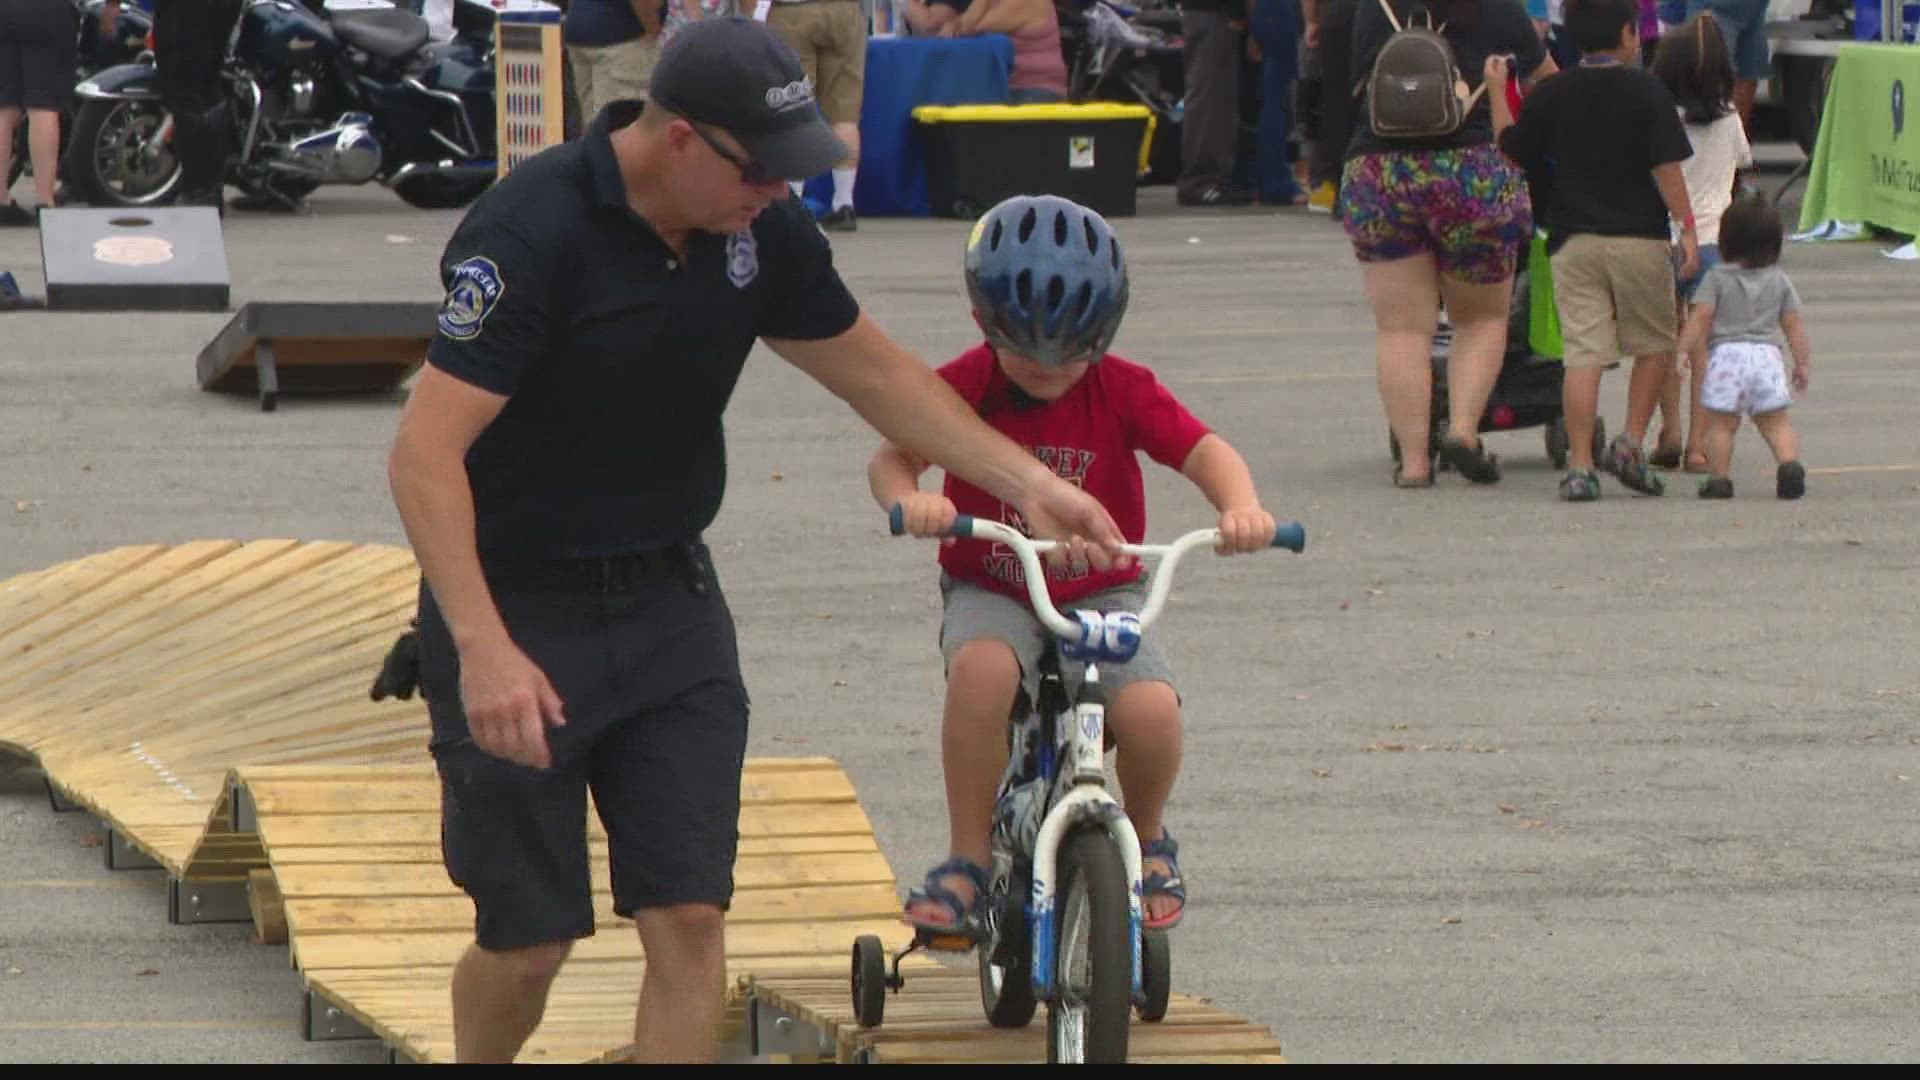 IMPD's community event comes just days after two children were shot at a July 4 cookout on the east side.